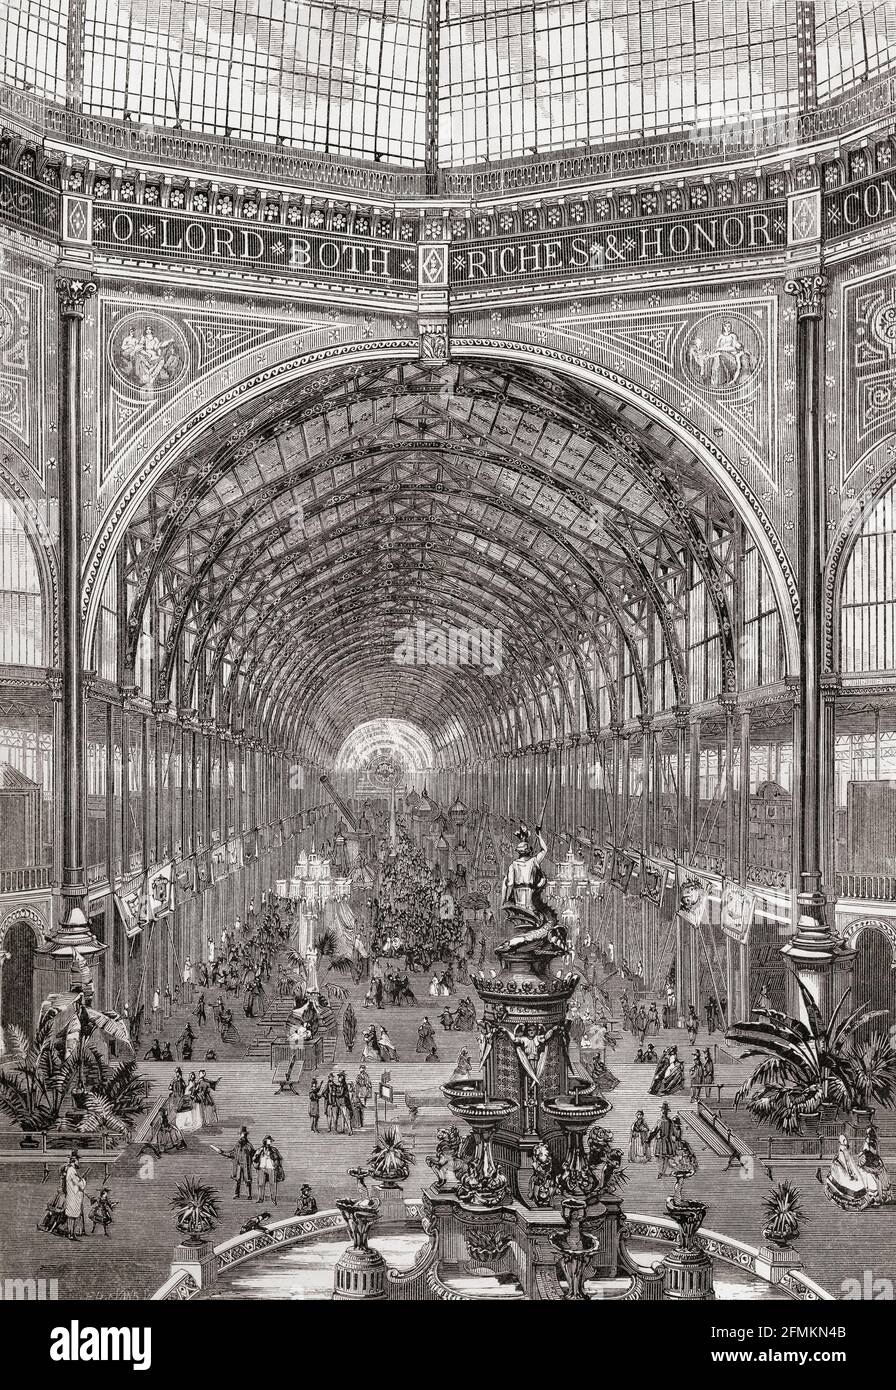 The International Exhibition of 1862, or Great London Exposition, South Kensington, London, England. A persective view of the nave, designed by Captain Francis Fowke of the Royal Engineers. From A Concise History of The International Exhibition of 1862, published 1862. Stock Photo